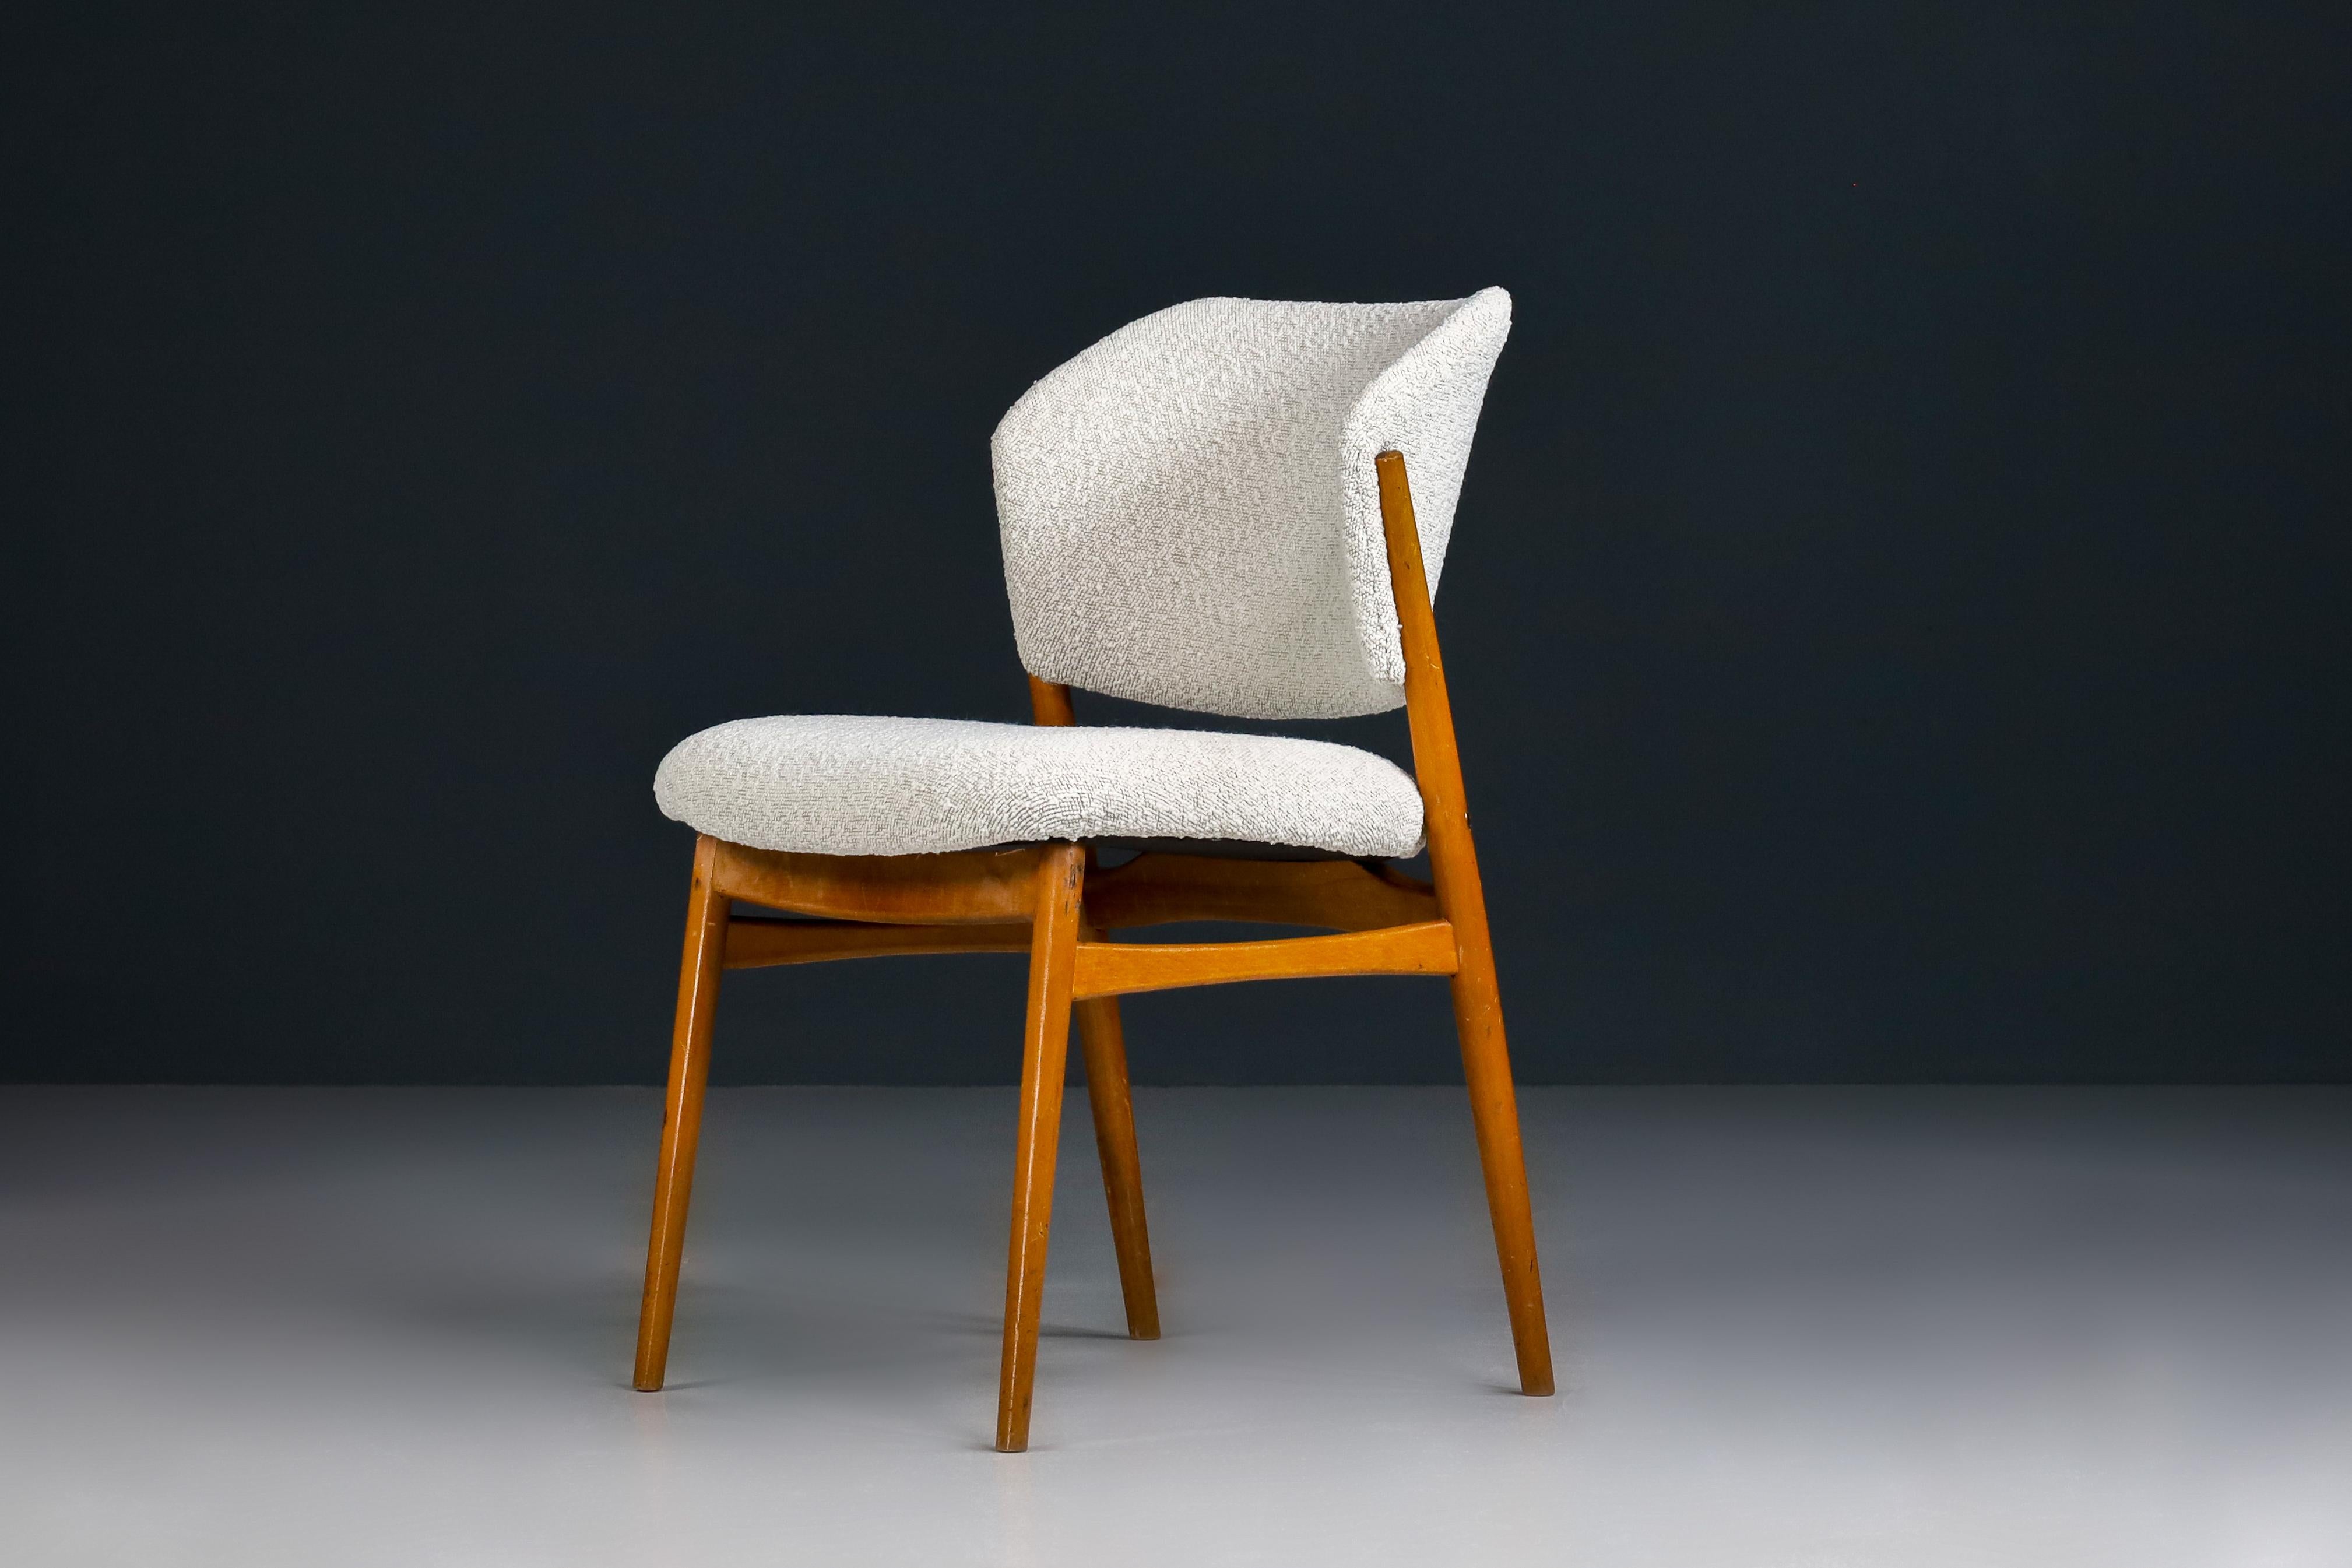 Mid-Century Modern Dining Chairs in New Bouclé Fabric by Spahn, Germany 1950s

Mid-Century Modern dining chairs by Spahn, Germany 1950s. Newly reupholstered in a of white bouclé fabric that shows visual depth while providing a smooth finish to the